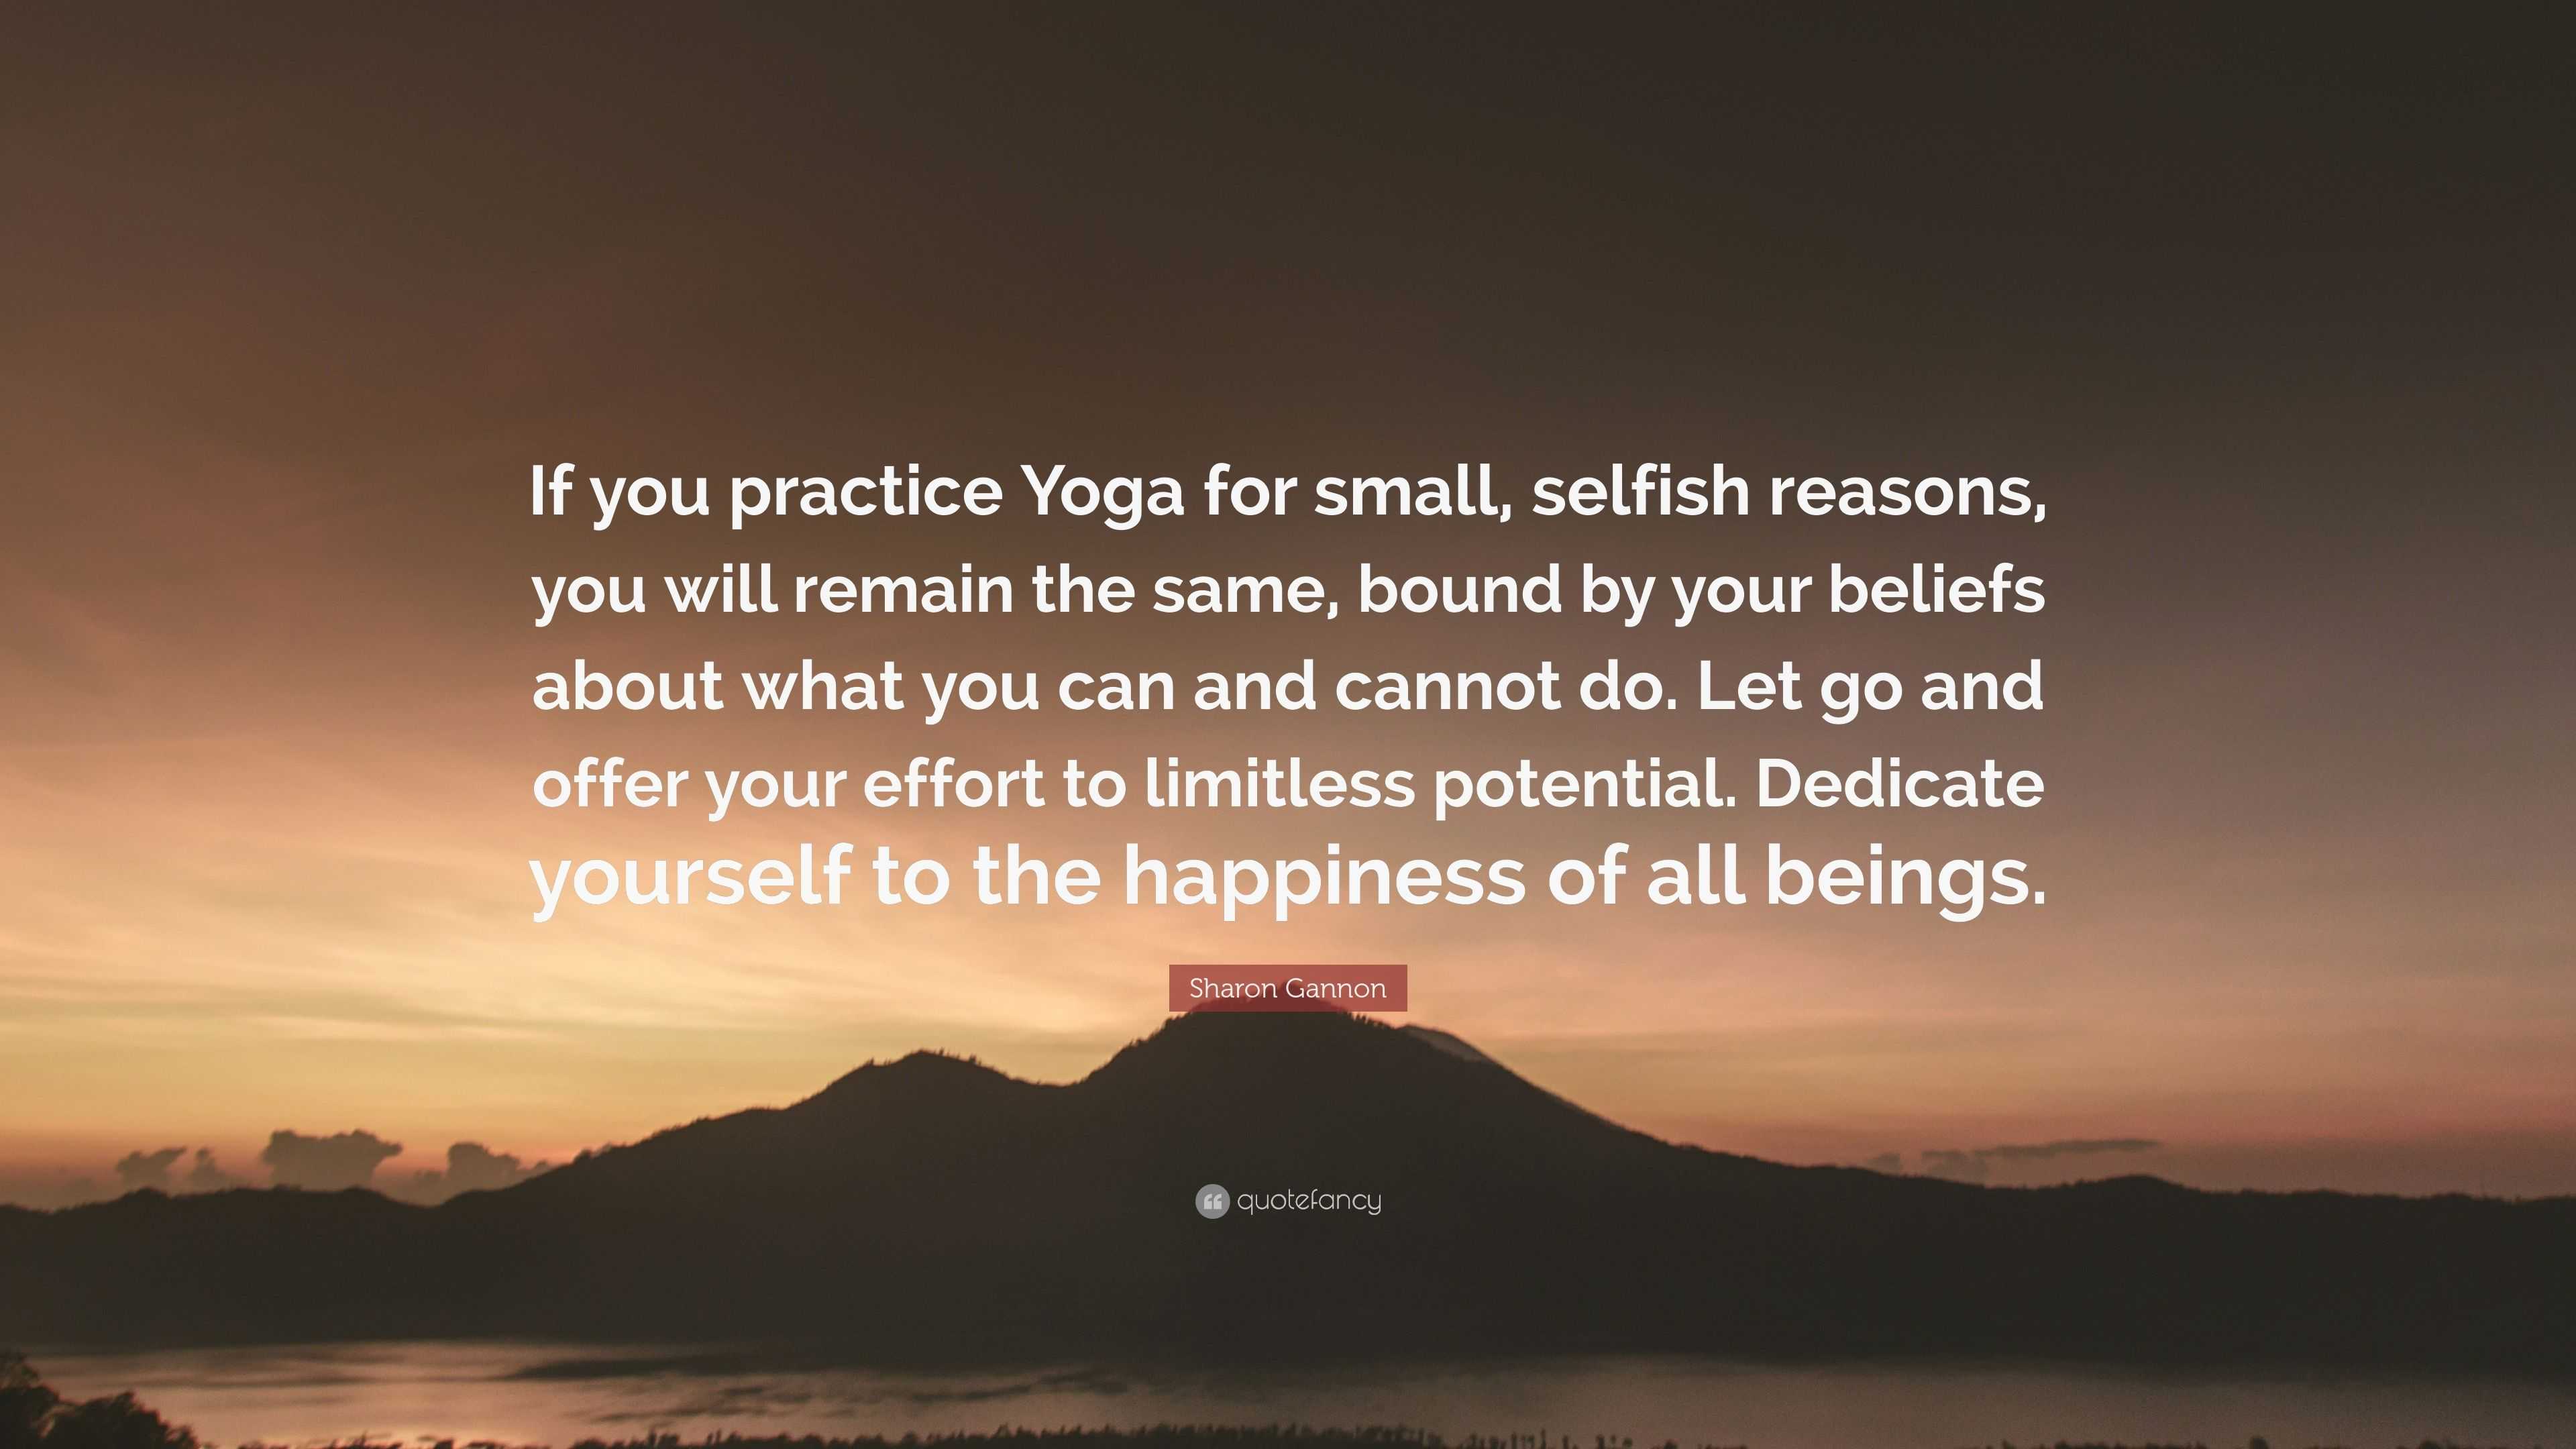 Sharon Gannon Quote: “If you practice Yoga for small, selfish reasons ...